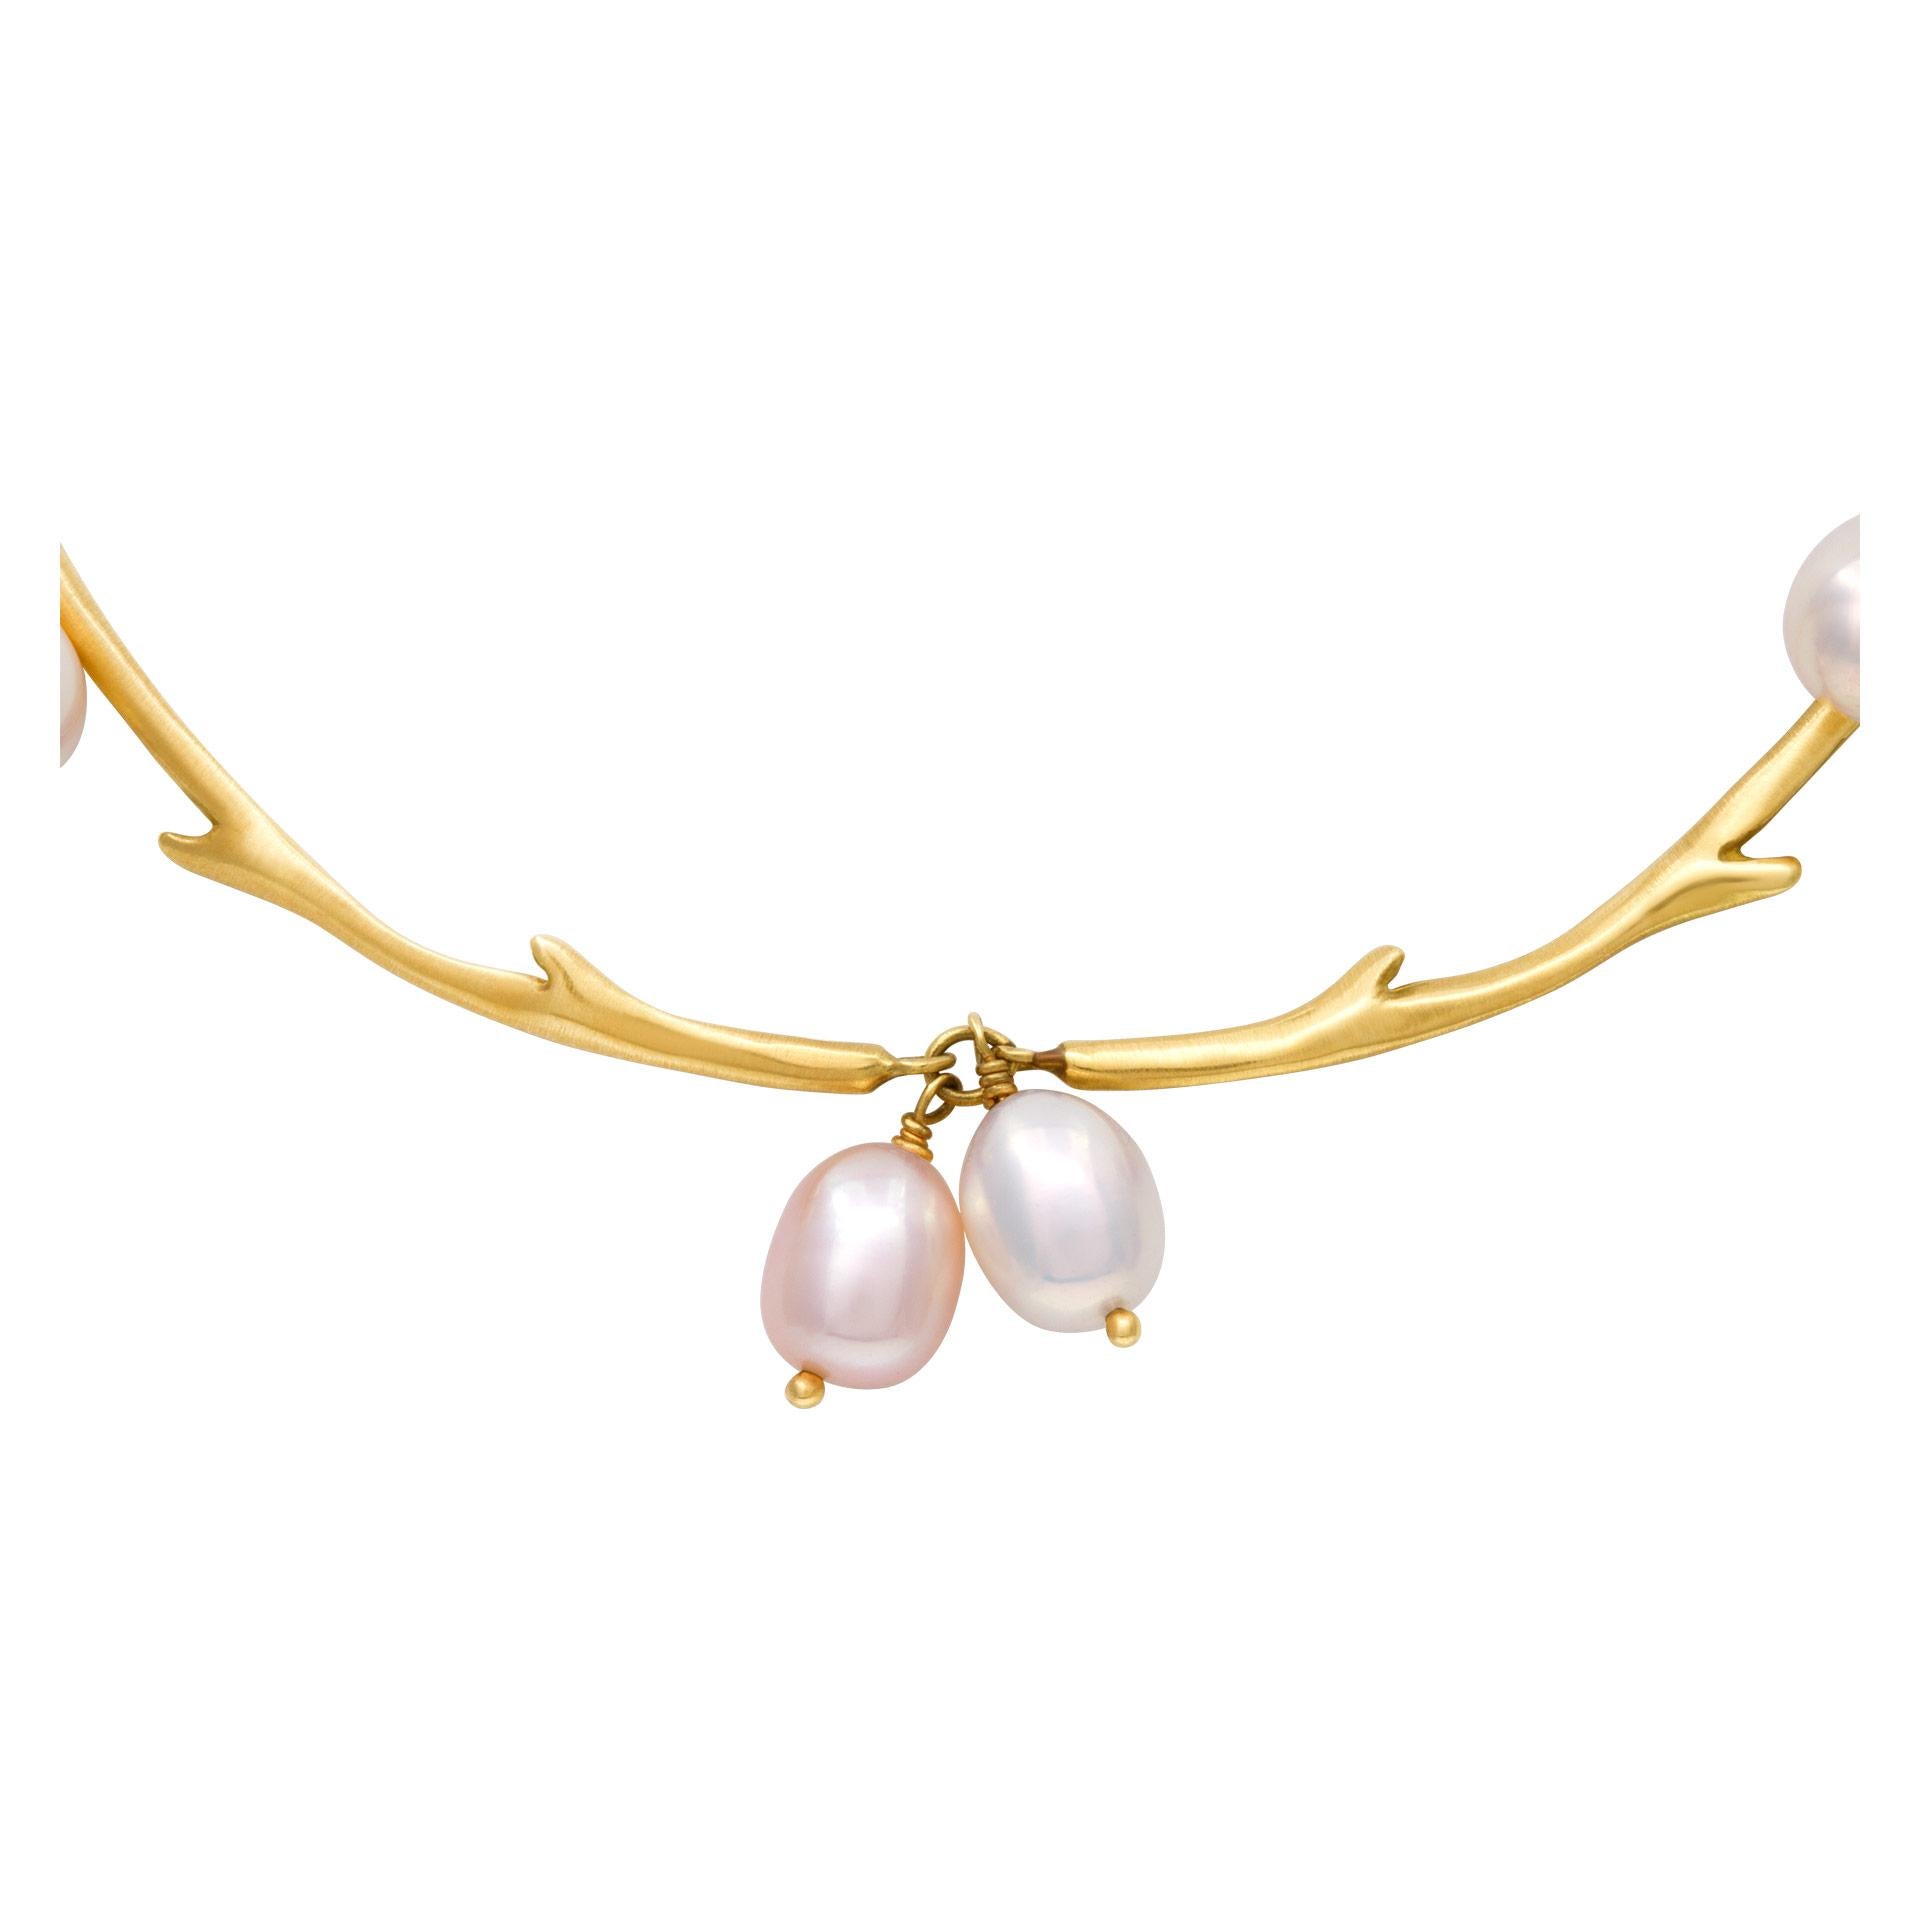 ESTIMATED RETAIL: $4,680 YOUR PRICE: $3,000 - Elegant Iridesse necklace in 18k gold with silver and pink overtone pearls. Length 14.5 inches.